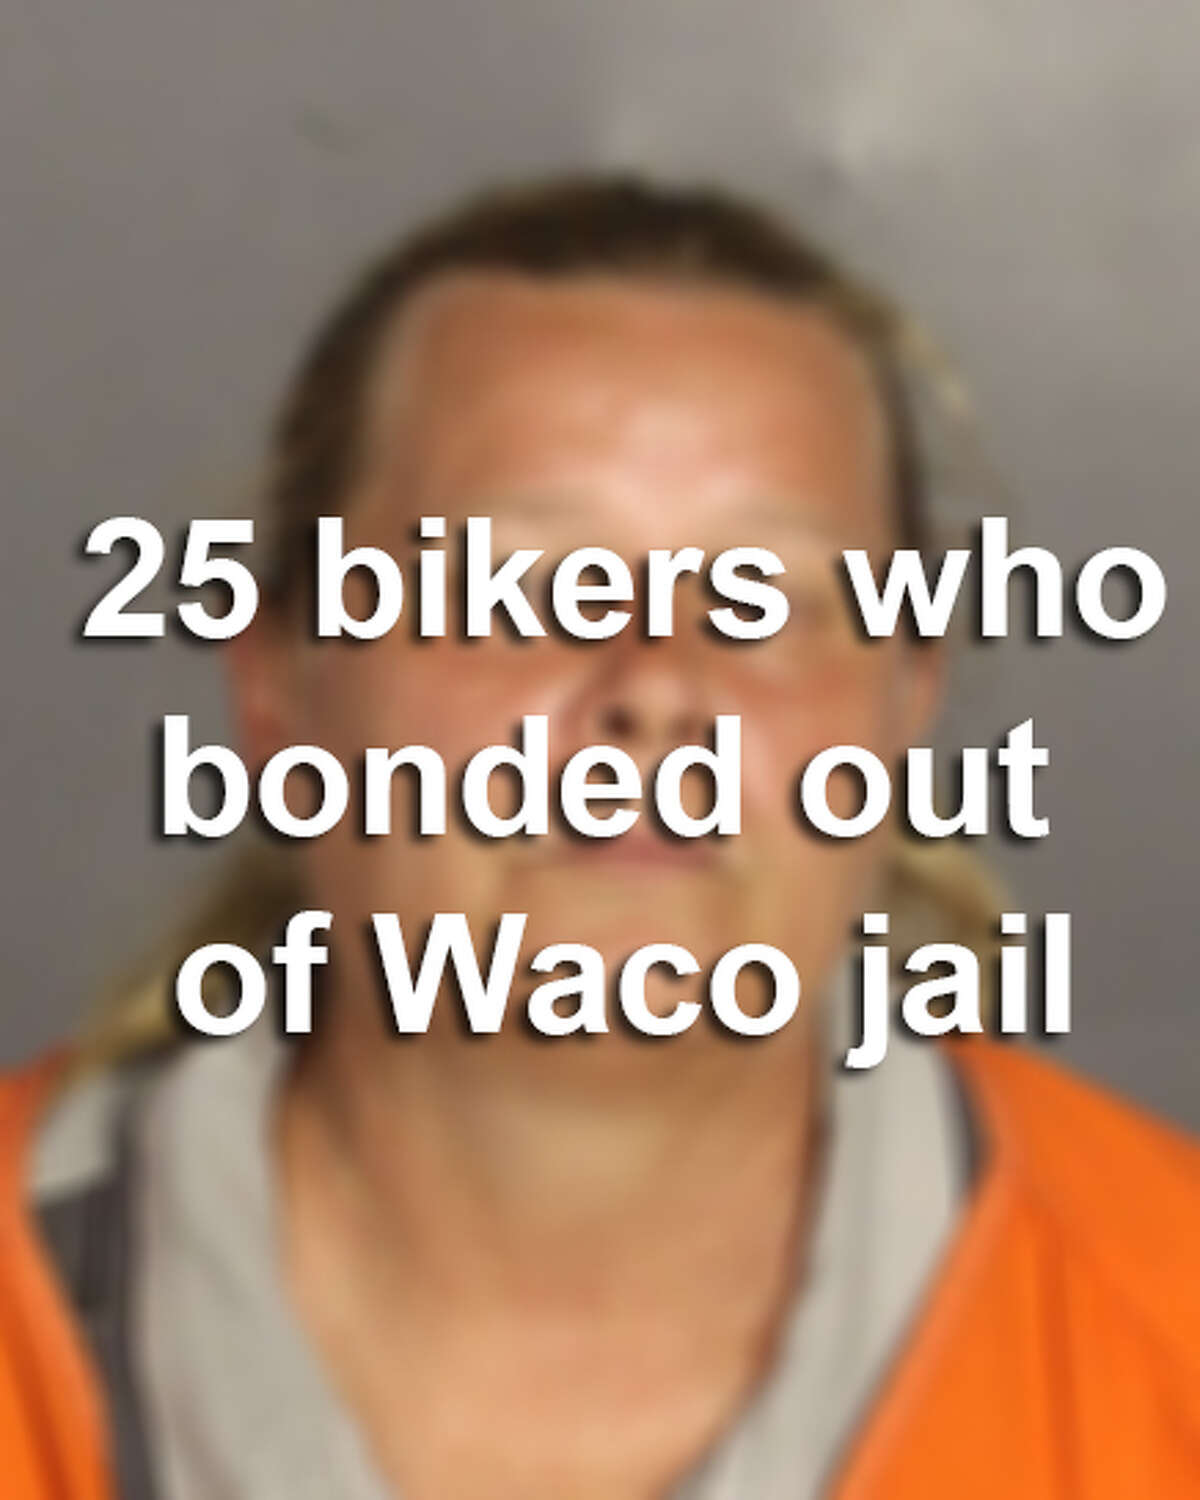 Click through the gallery to see the 25 bikers who have bonded out of Waco jail so far.